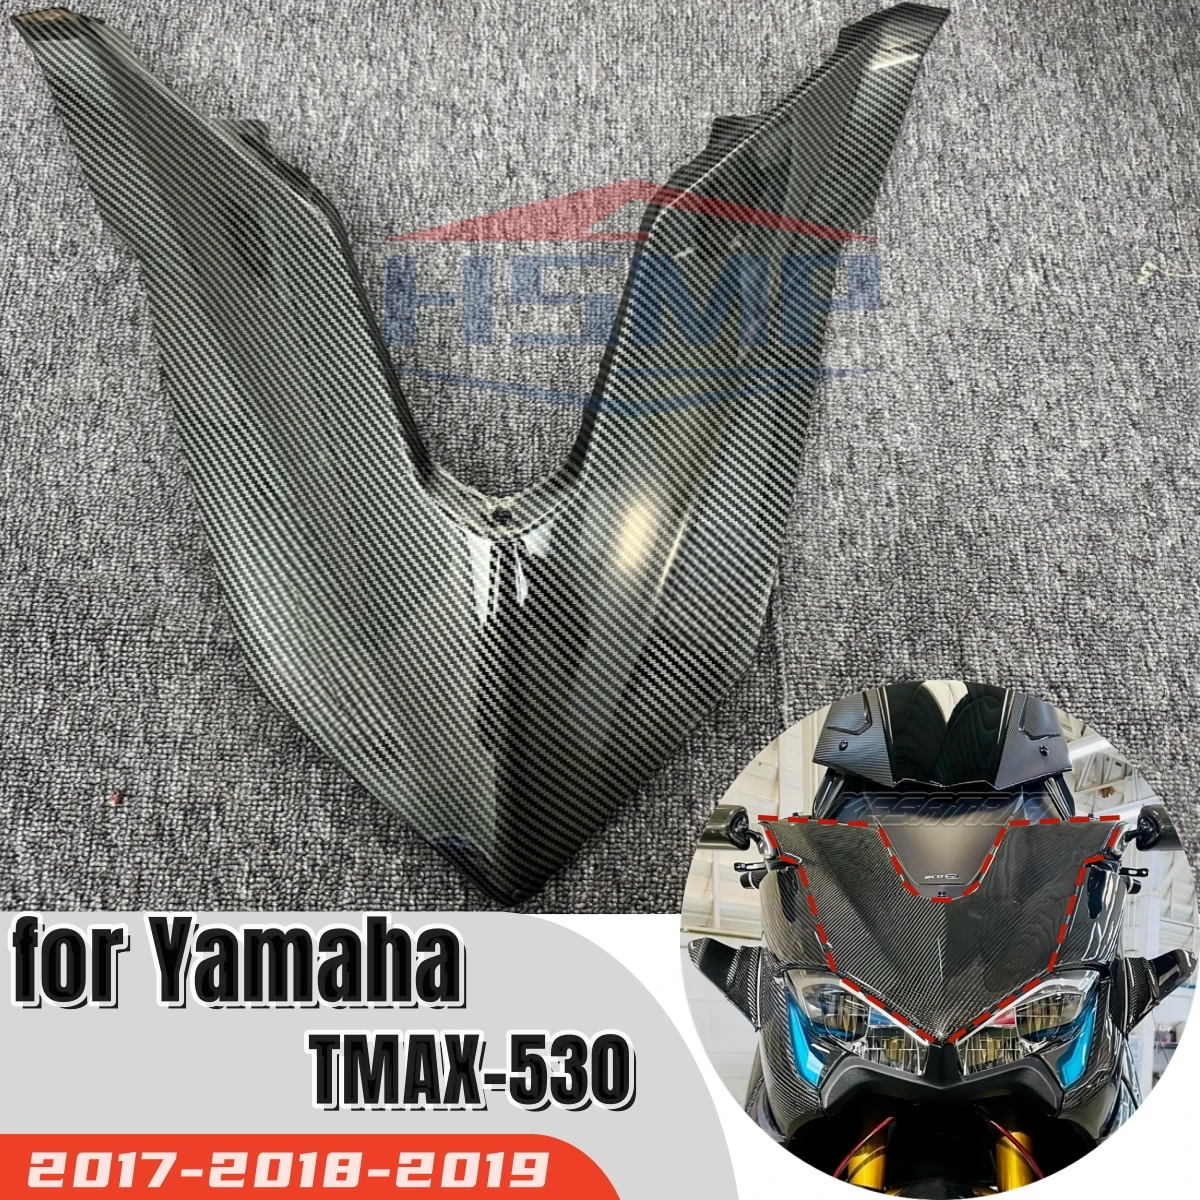 

for Yamaha TMAX 530 tmax-530 2017 2018 2019 motorcycle front headlight cover side panel fairing ABS carbon fiber coating